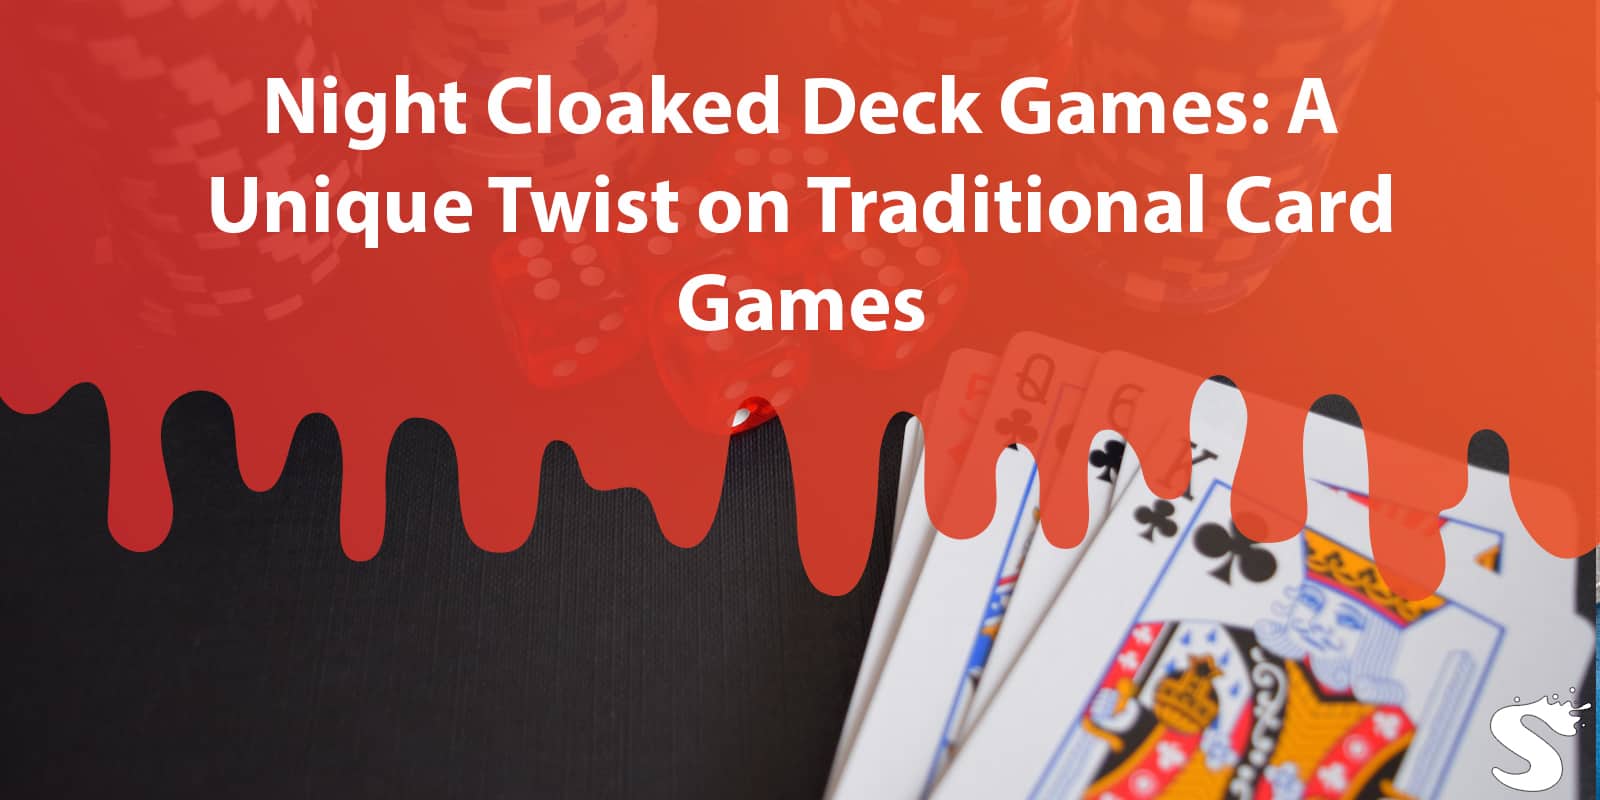 Night Cloaked Deck Games: A Unique Twist on Traditional Card Games